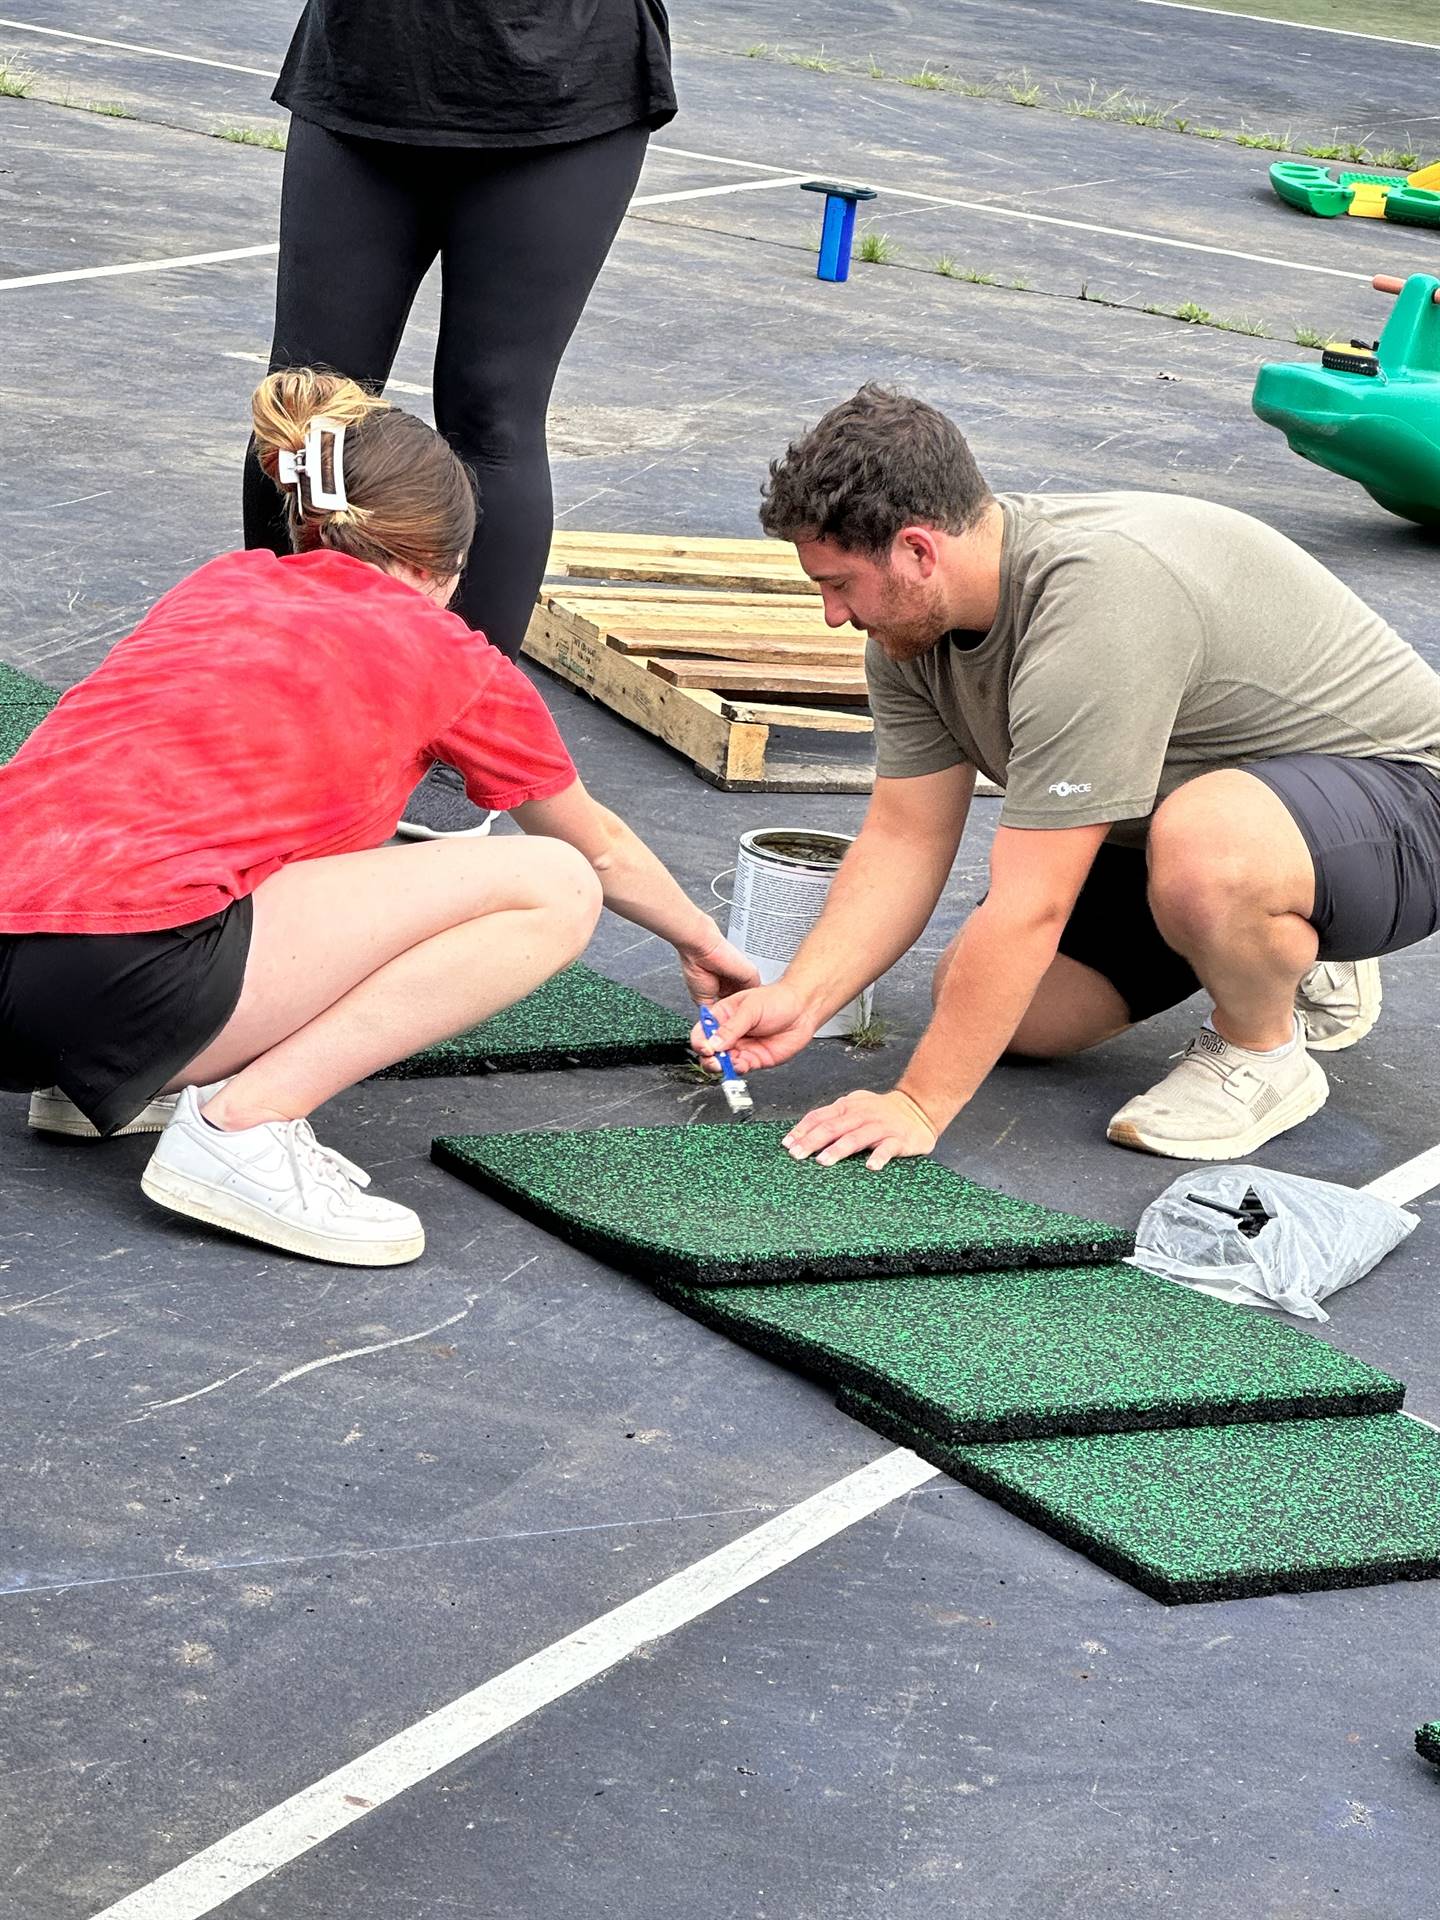 Staff working on the playground tiles